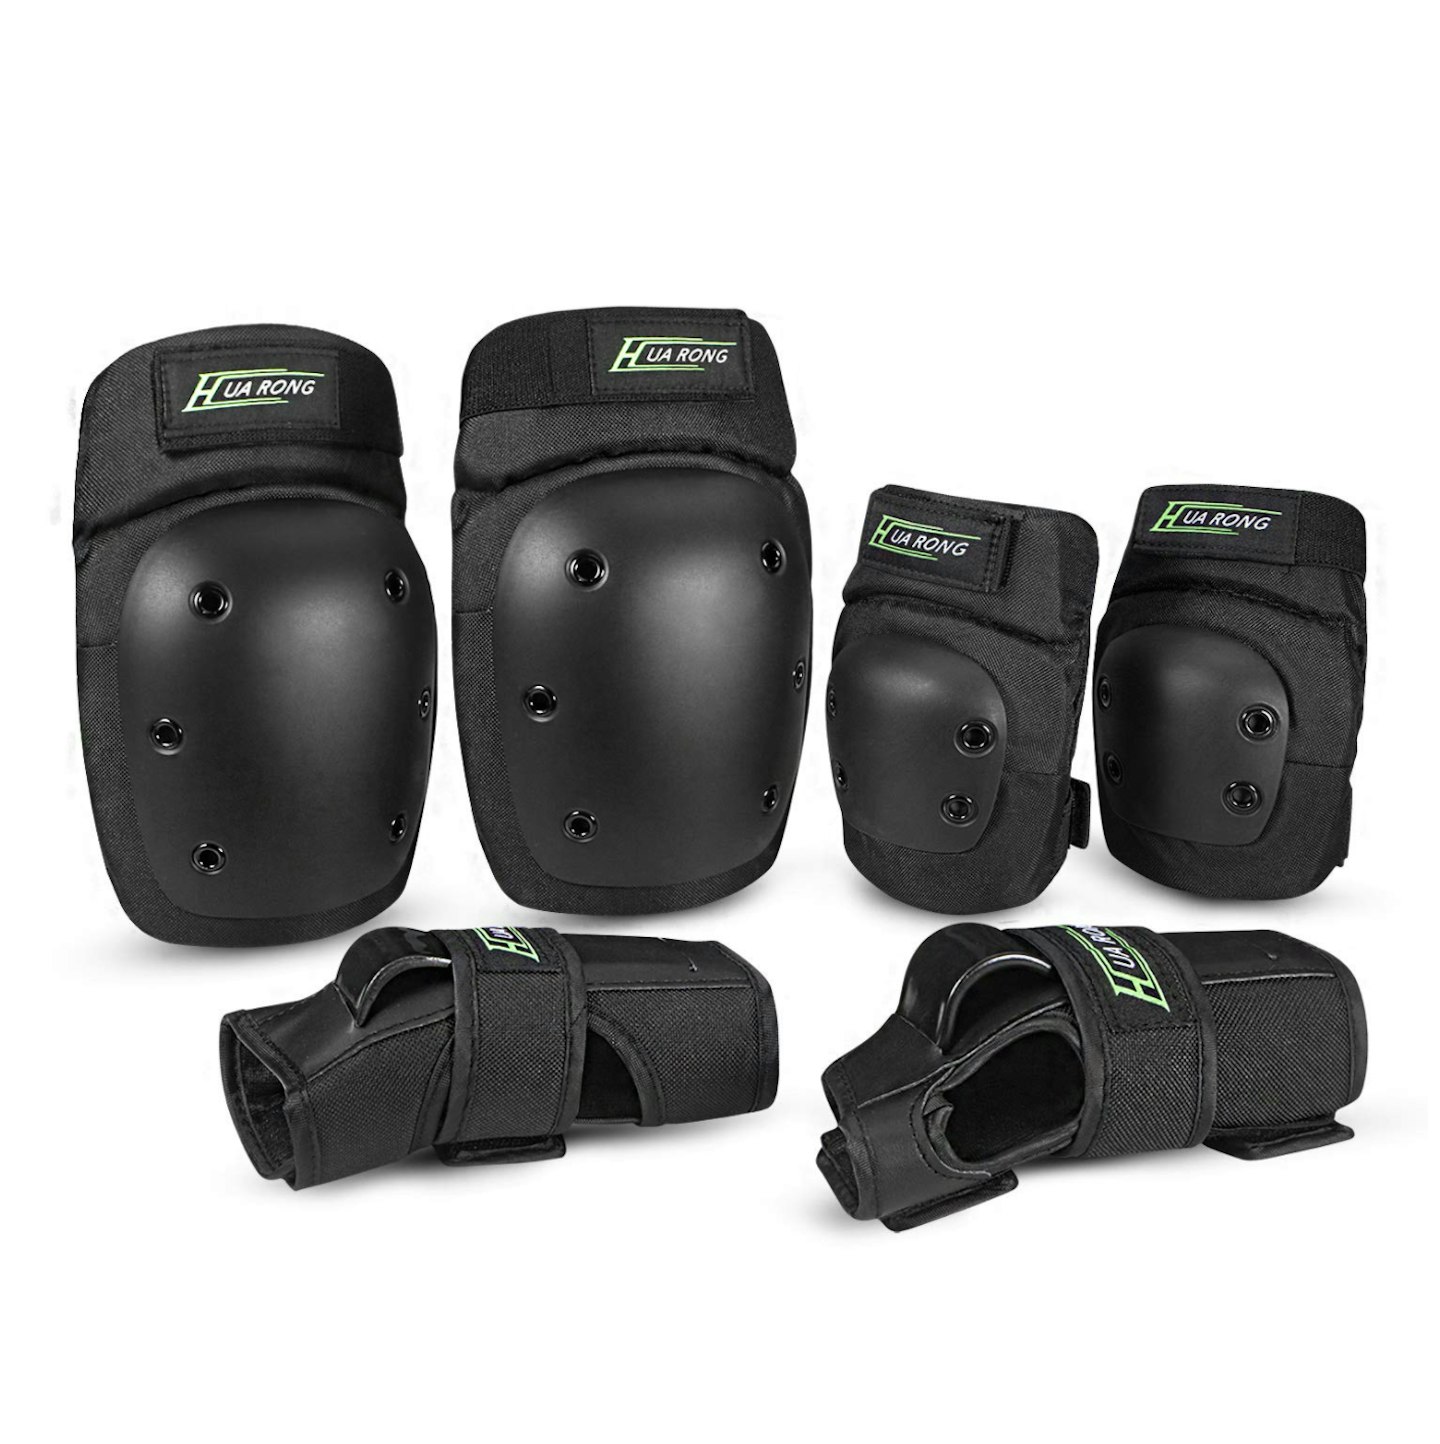 Everwell Protective Protective Gear Set